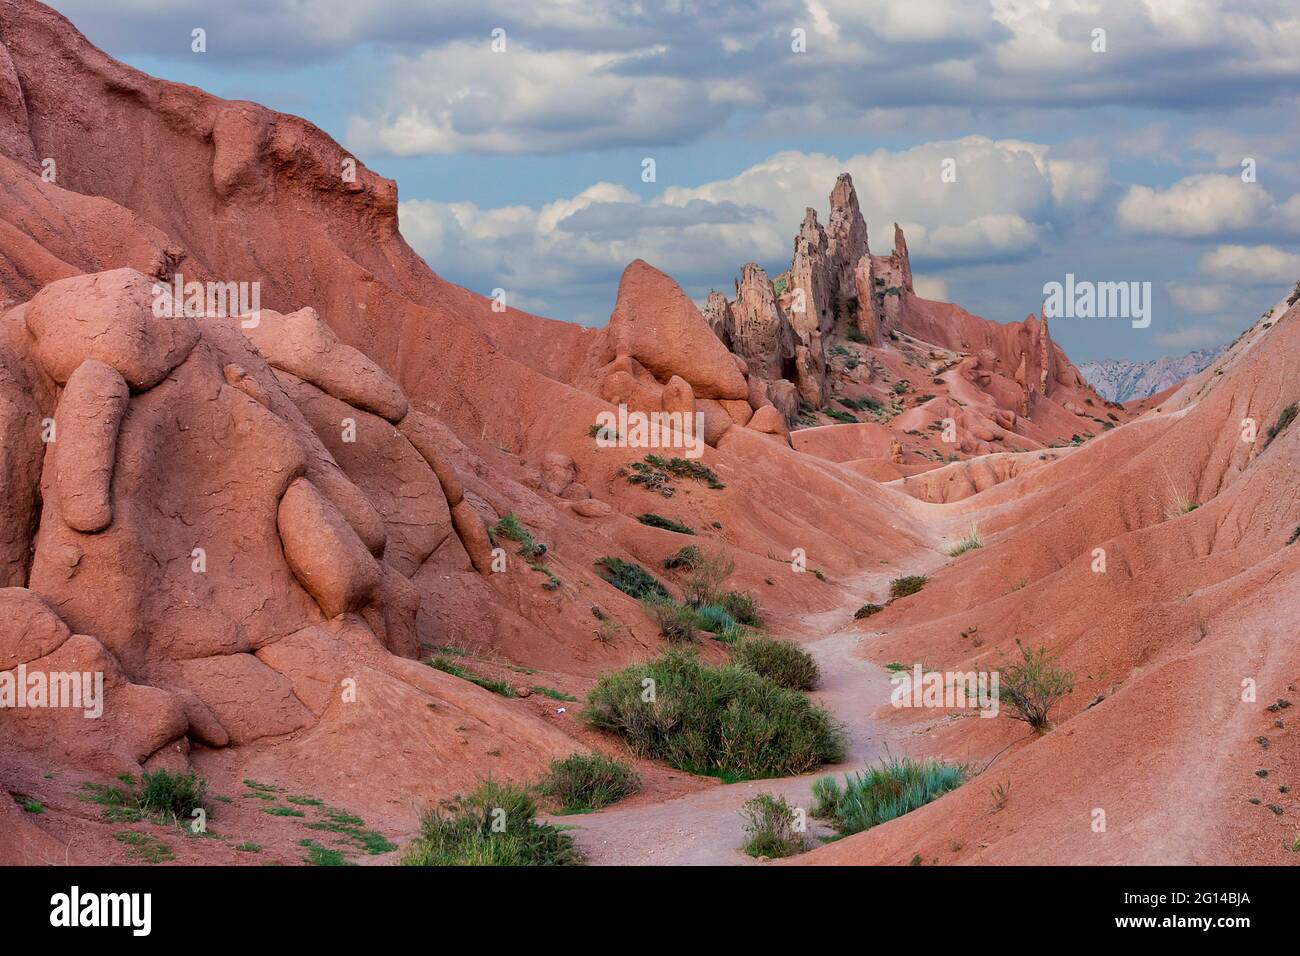 Red rock formations known as Fairy Tale Castle, in Kaji Say, Kyrgyzstan Stock Photo